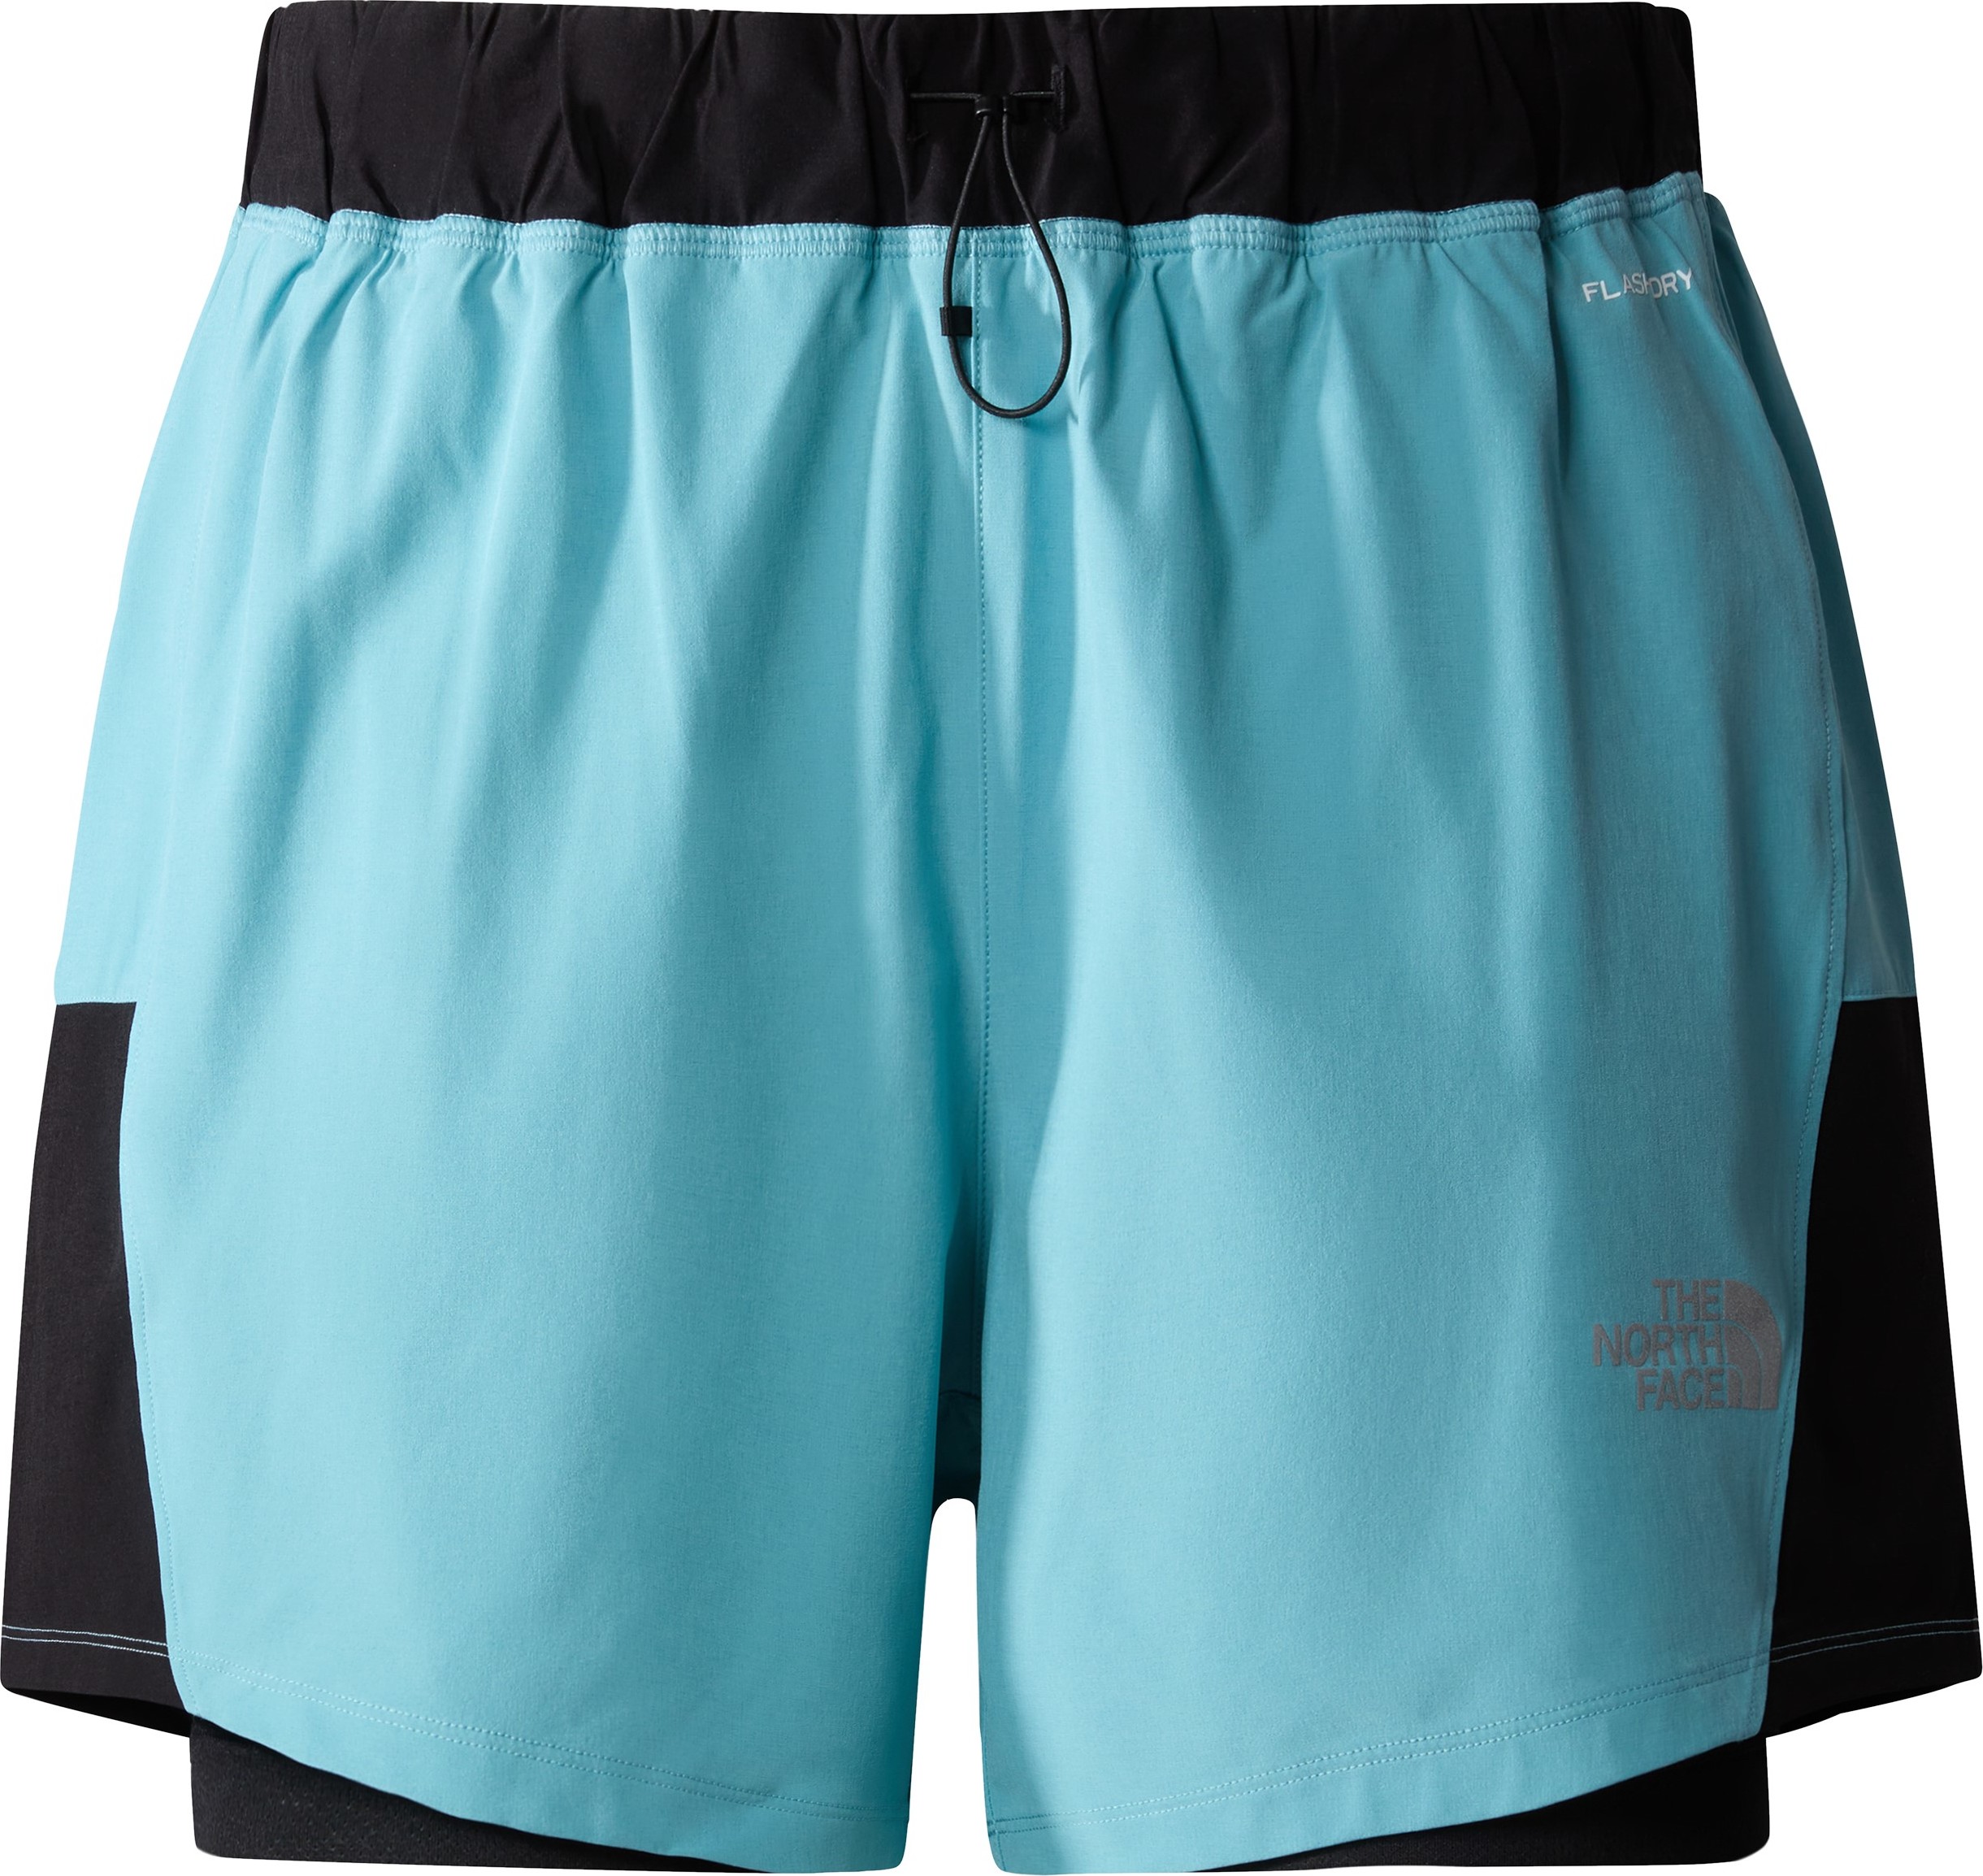 The North Face The North Face Women's 2 In 1 Shorts Reef Waters/Tnf Black S, REEF WATERS/TNF BLACK